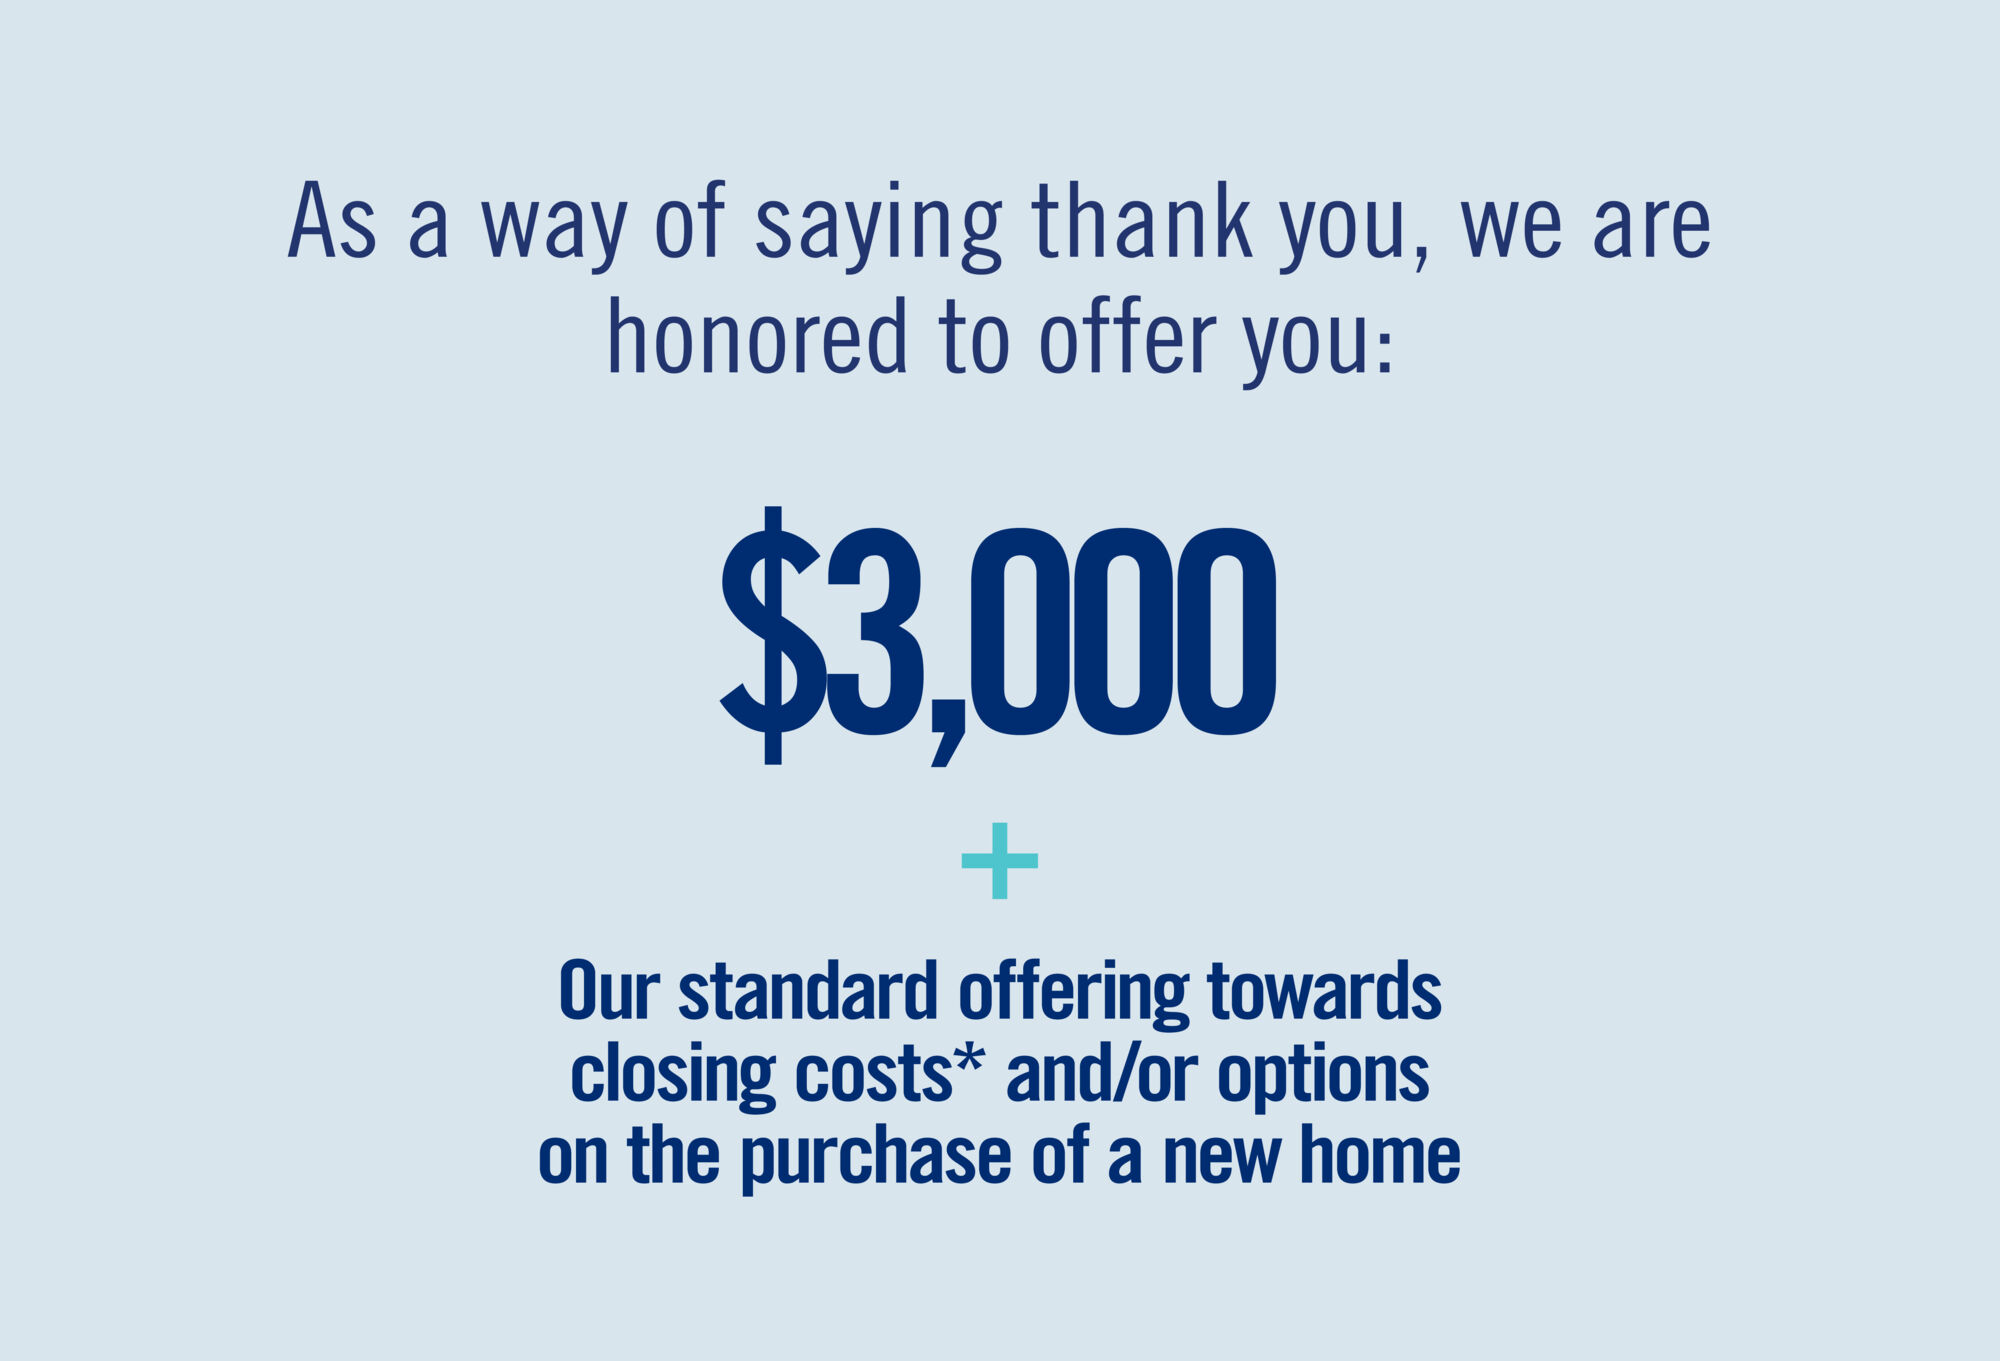 As a way of saying thank you, we are honored to offer you: $3,000 + Our standard offering towards closing costs* and /or options on the purchase of a new home